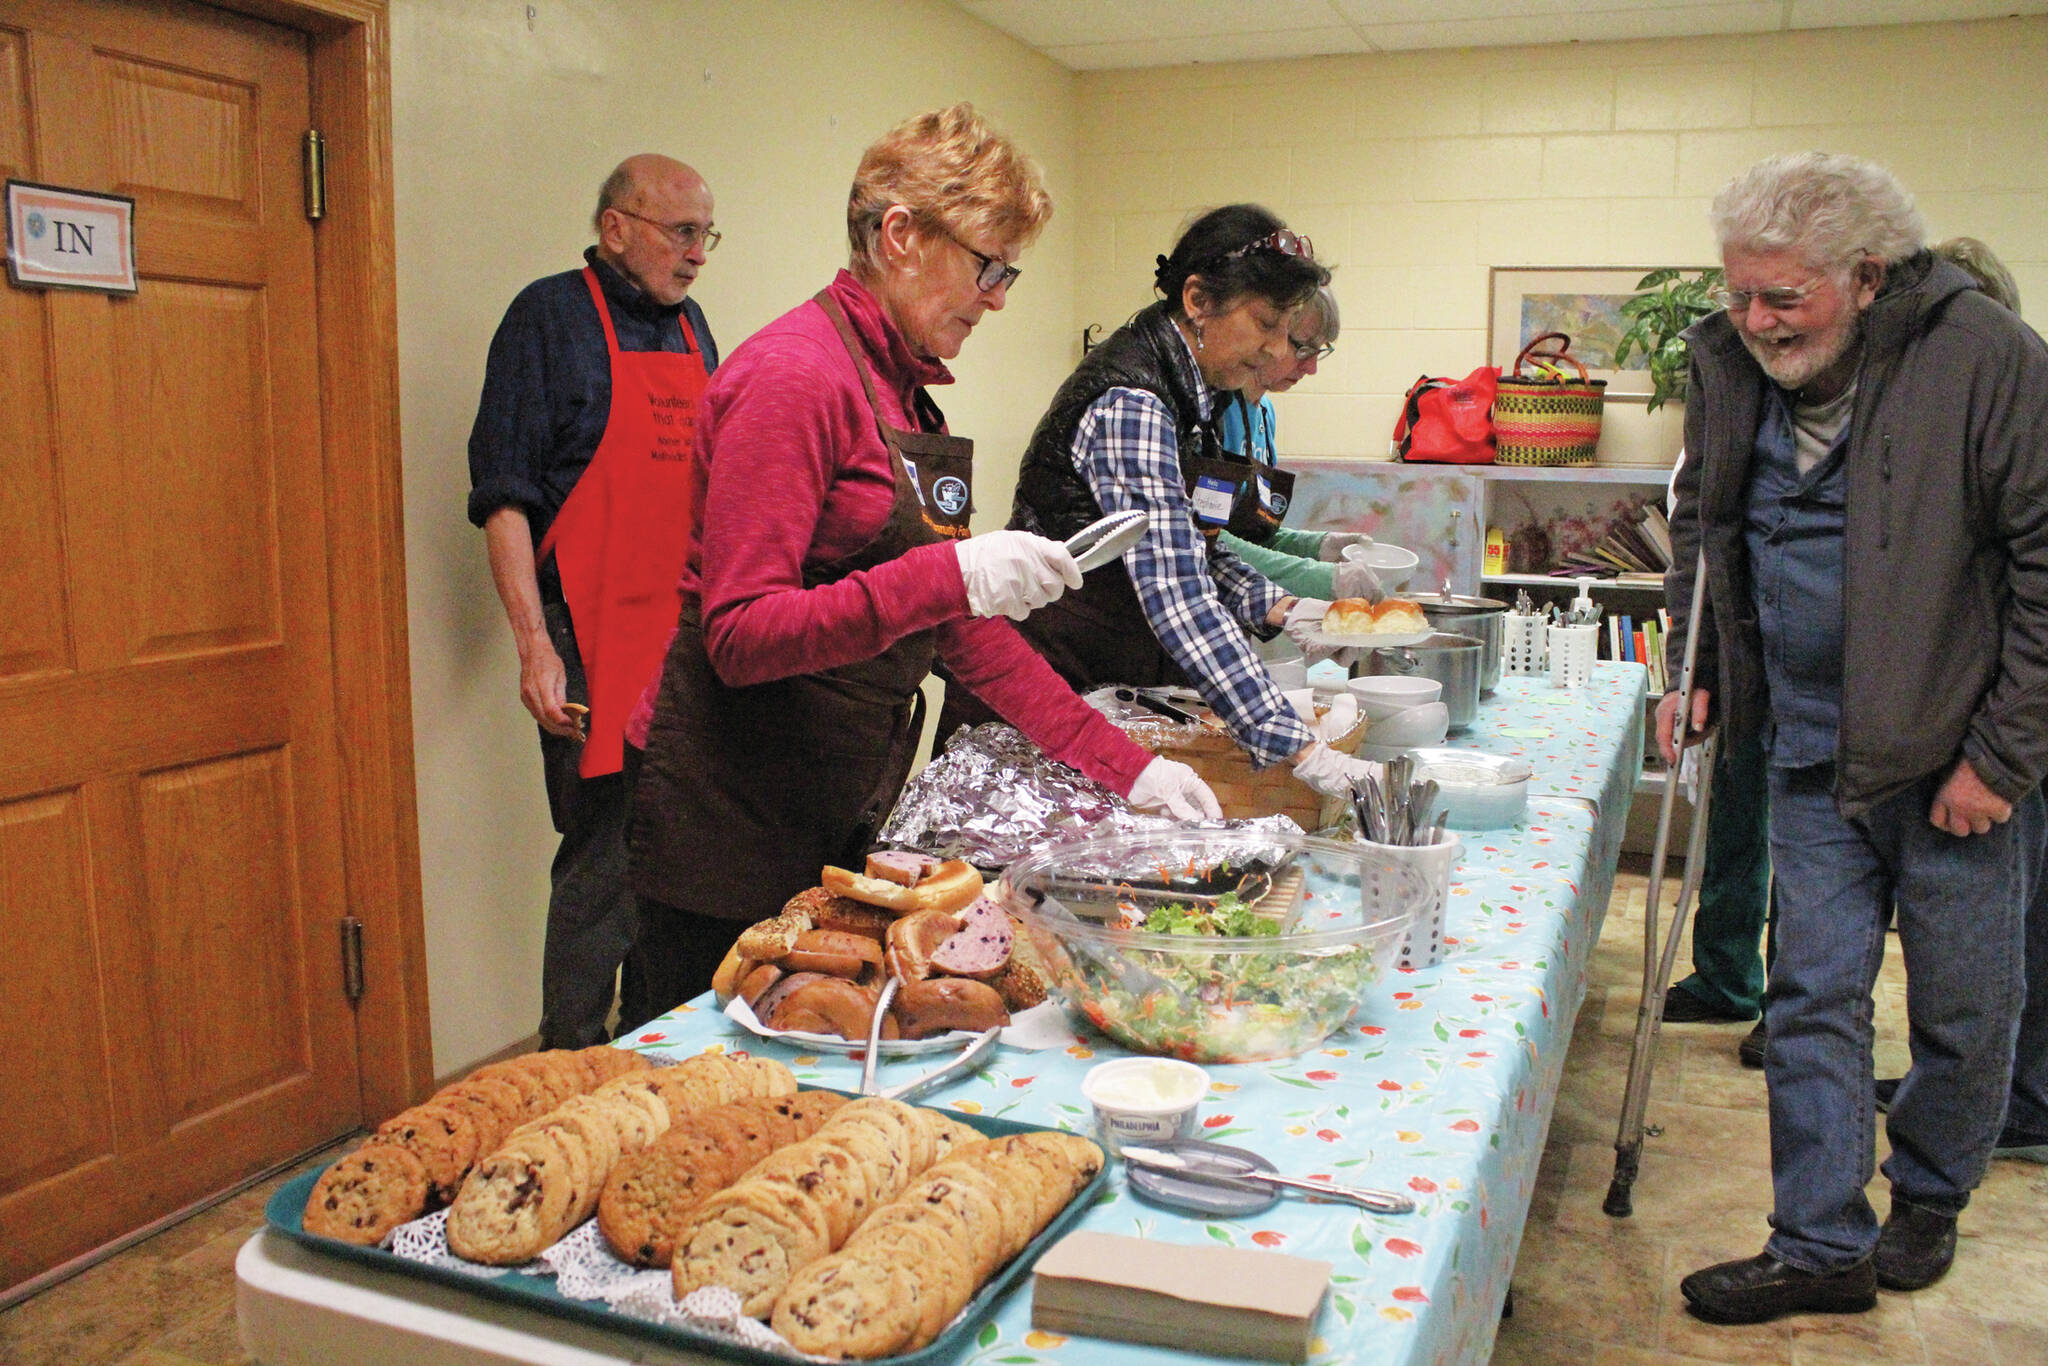 Photo by Megan Pacer/Homer News
Volunteers distibute a meal to attendees at Project Homeless Connect on Jan. 29, 2020 at Homer United Methodist Church in Homer, Alaska. The event is a one-day opportunity for the homeless to get access to necessary supplies and services.